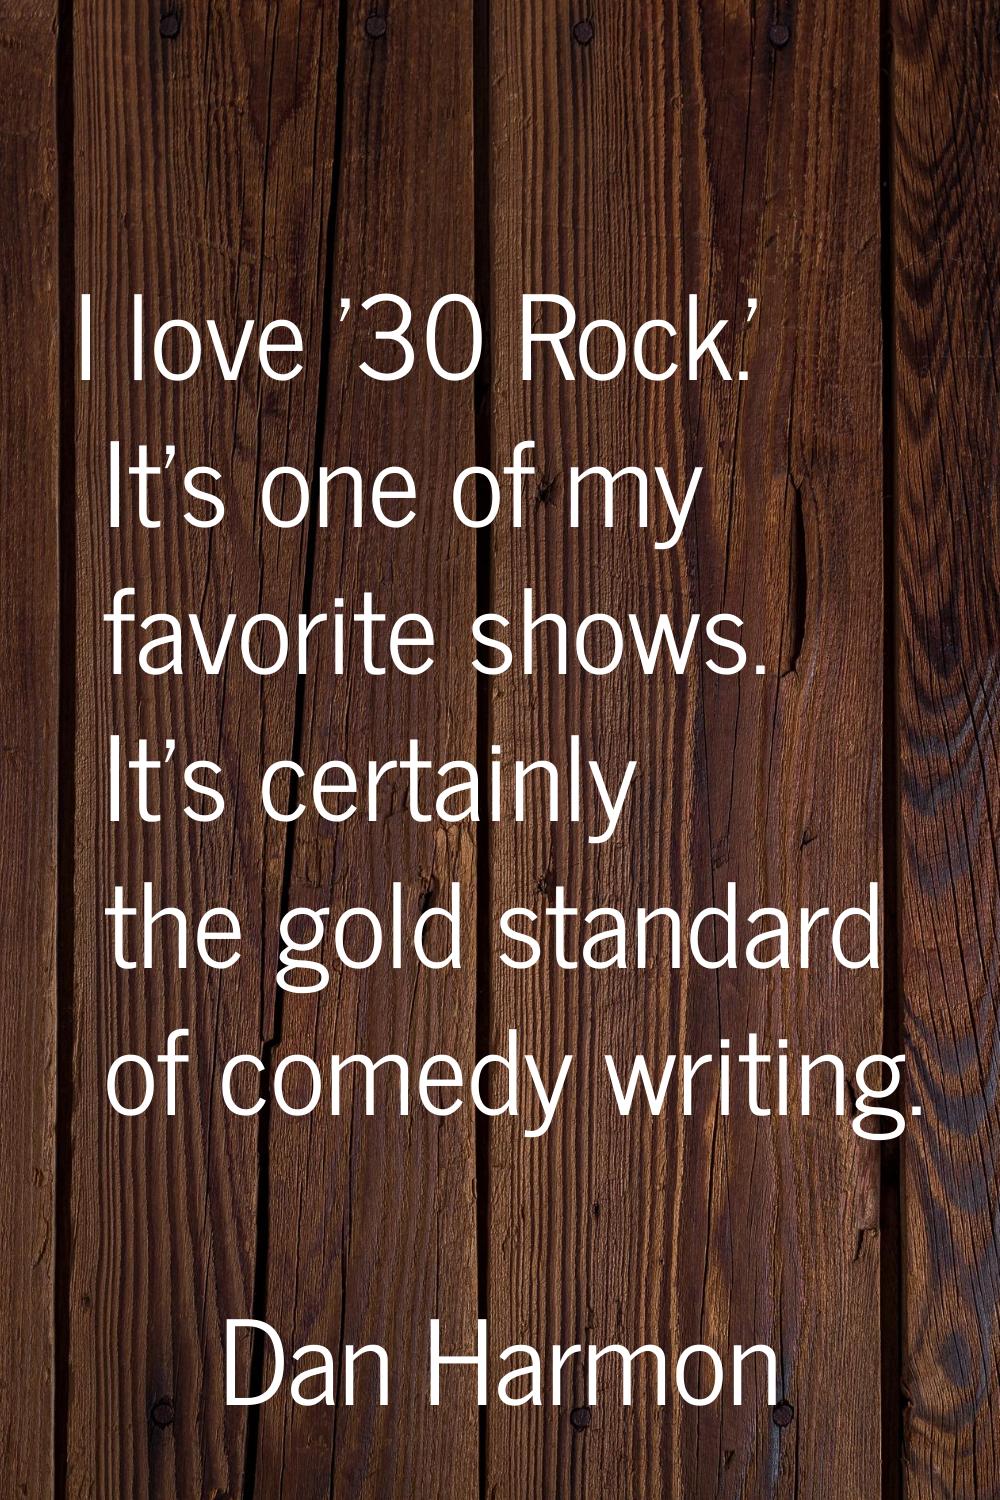 I love '30 Rock.' It's one of my favorite shows. It's certainly the gold standard of comedy writing